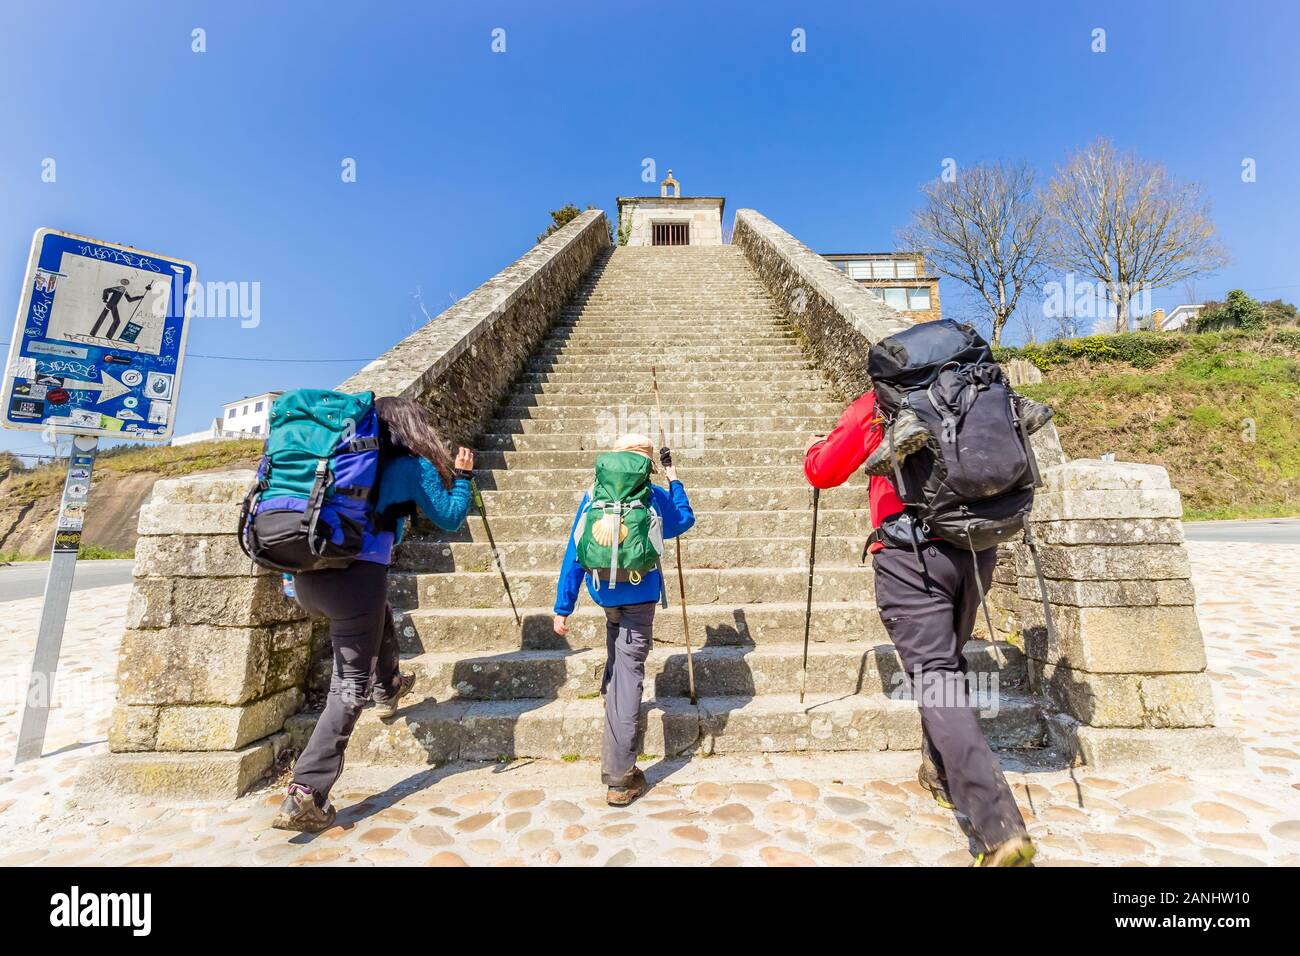 Two Adults and Child Pilgrims Ascending Stairs at City Entrance to Portomarin, along the Way of St James (Camino de Santiago) Stock Photo